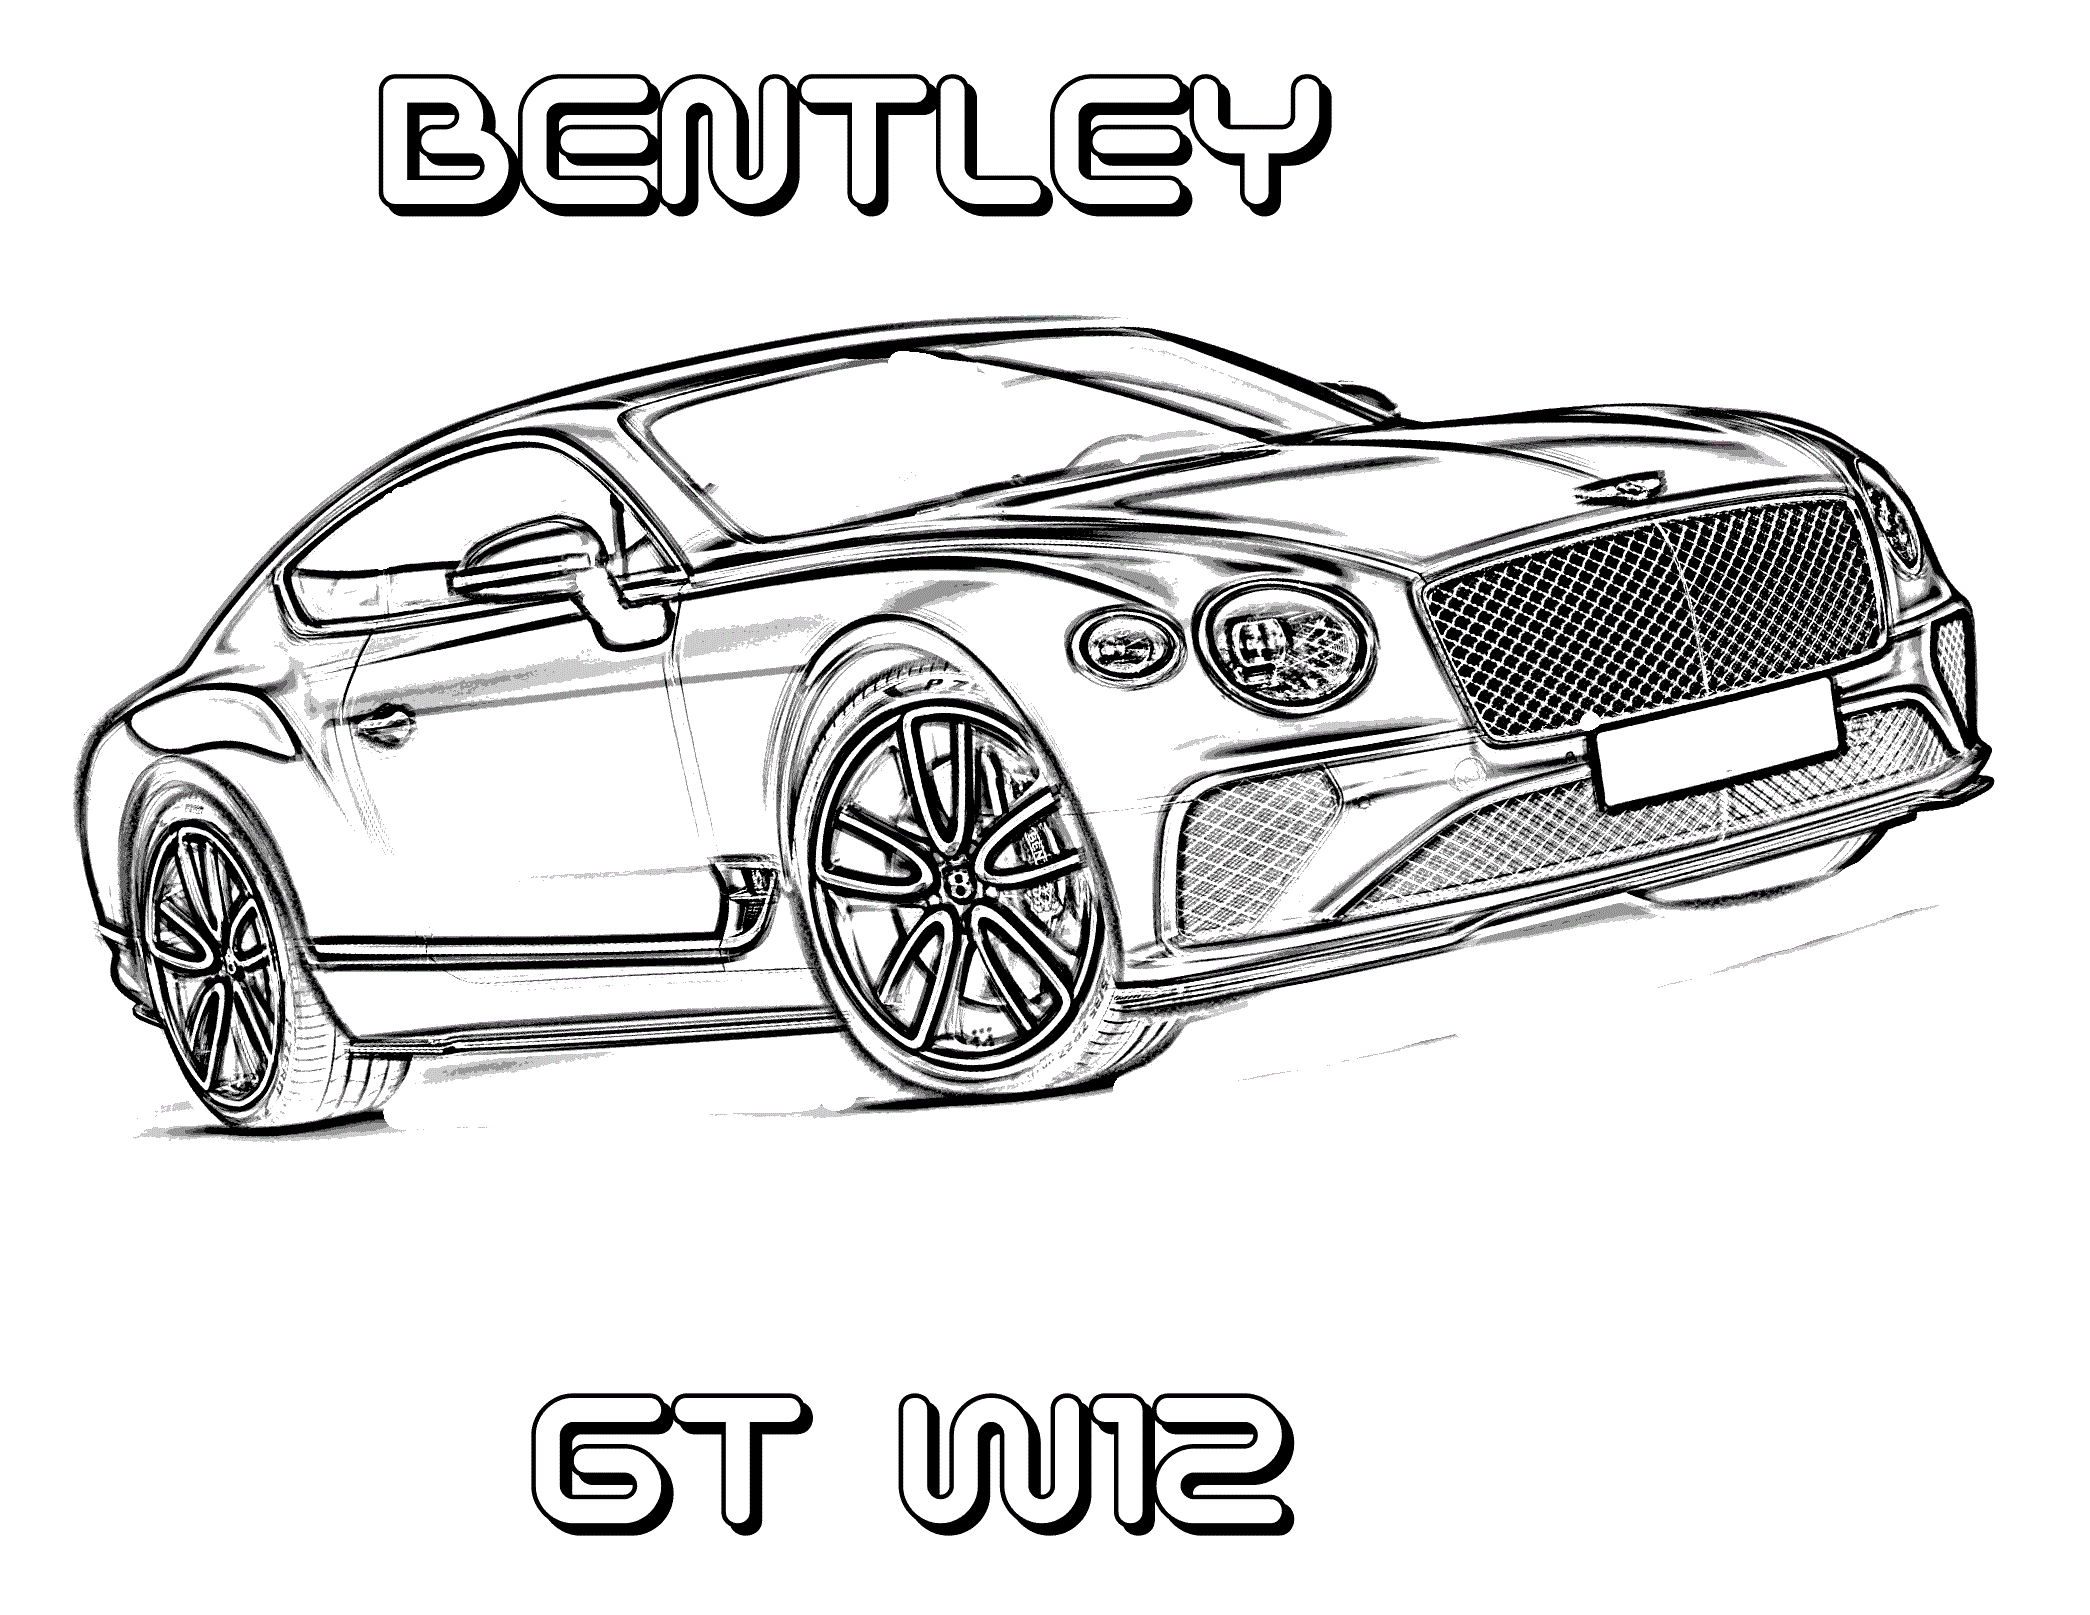 Bentley Coloring Pages